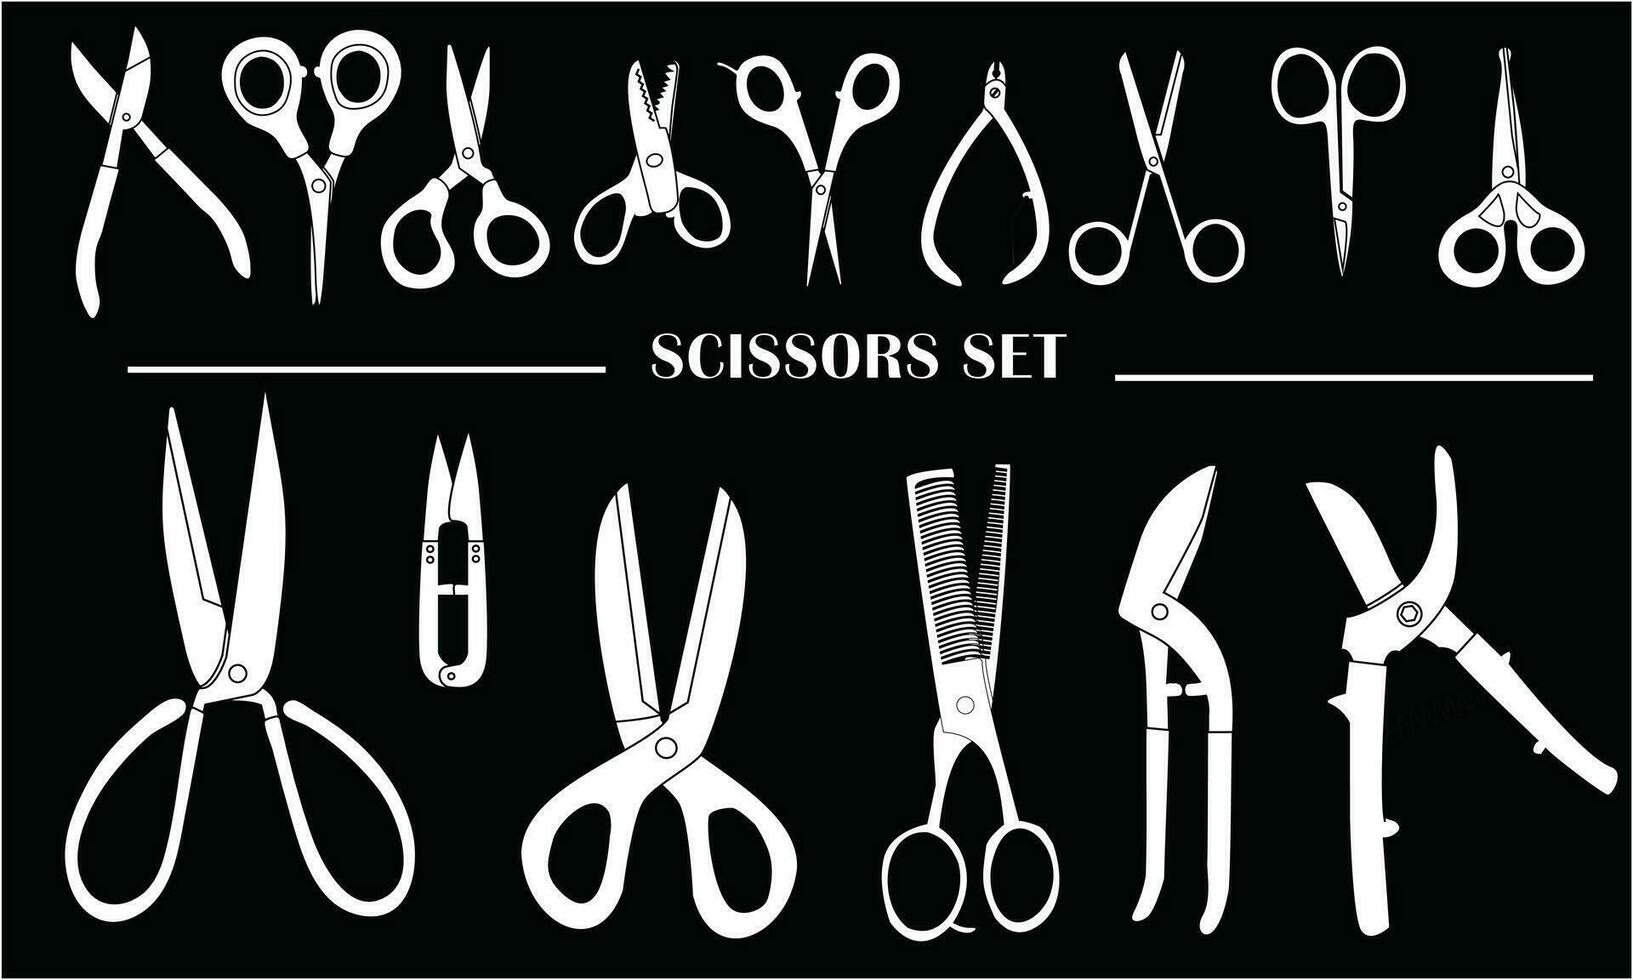 Different scissors types vector illustration in silhouette style. White scissor vector set icon in black background. Open, closed cutting scissors or nippers collection.